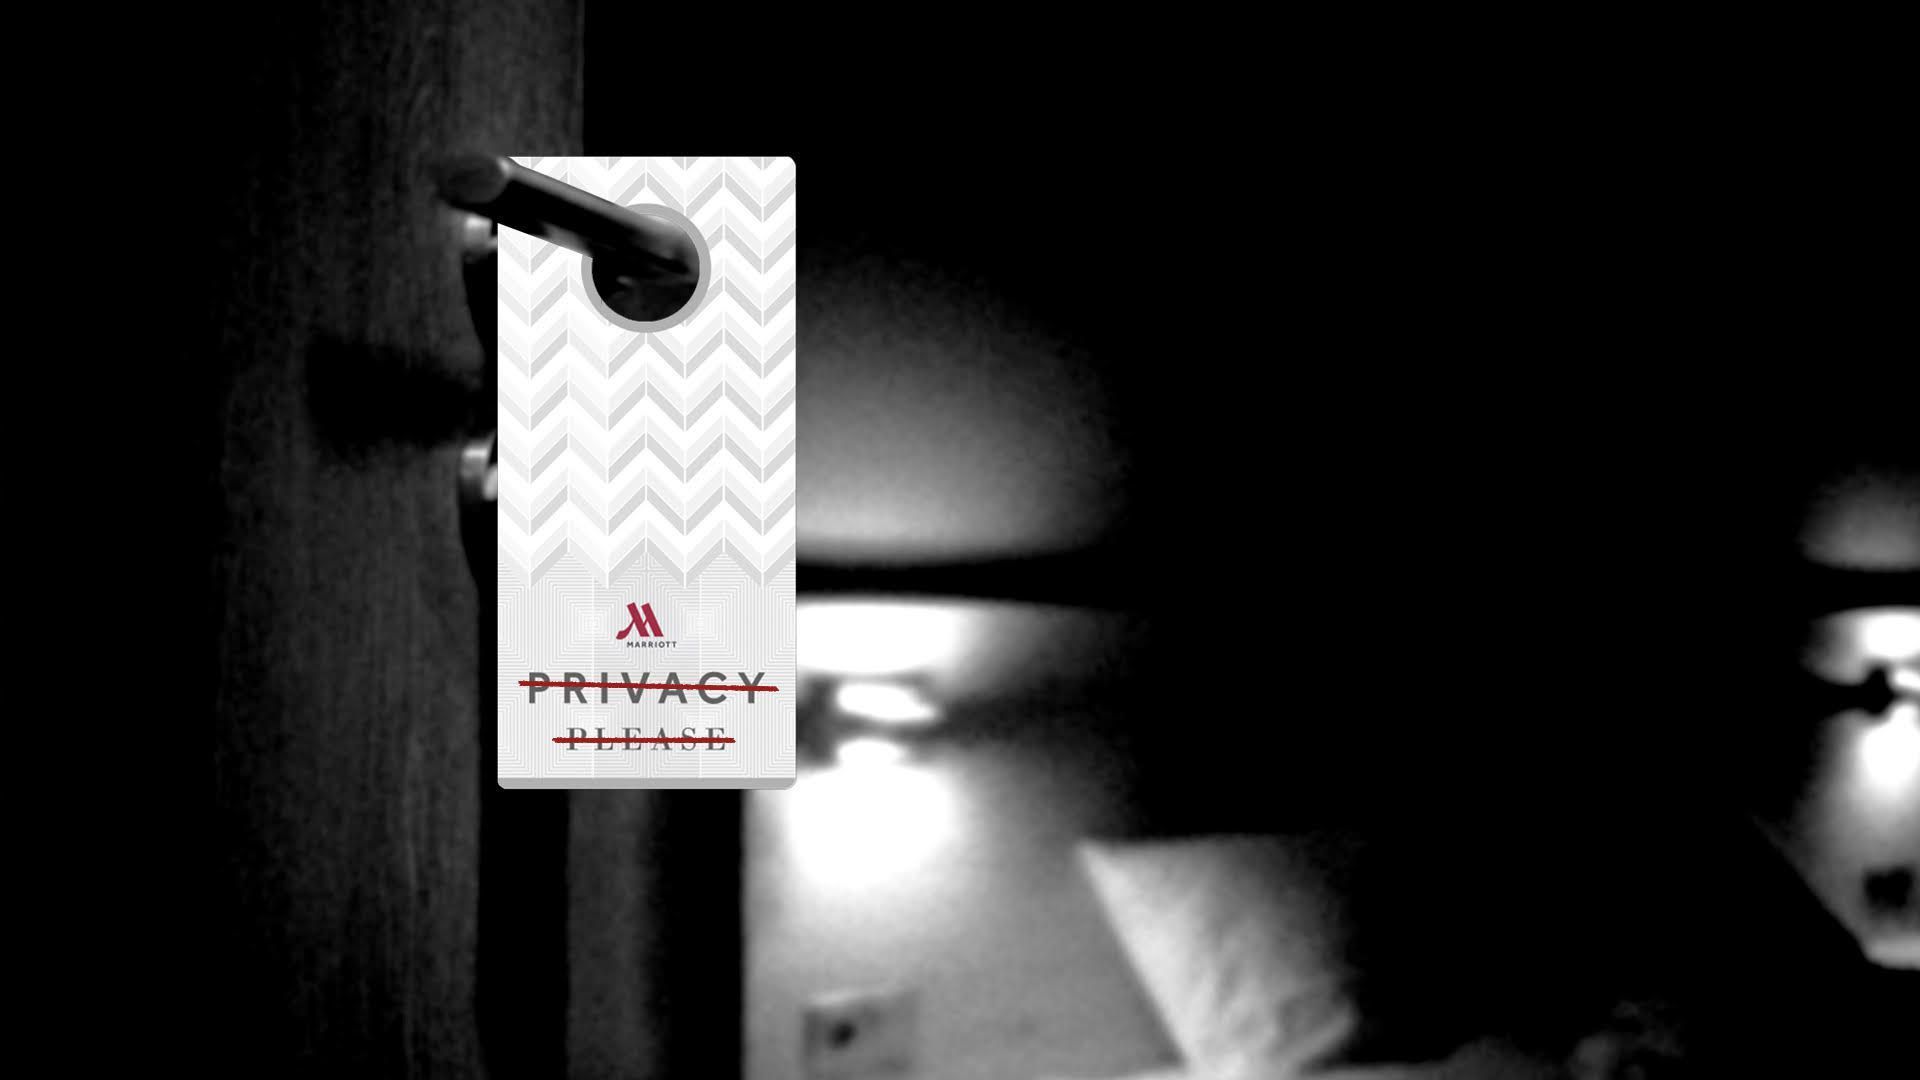 Illustration of a Marriott privacy please door hanger with the words crossed out